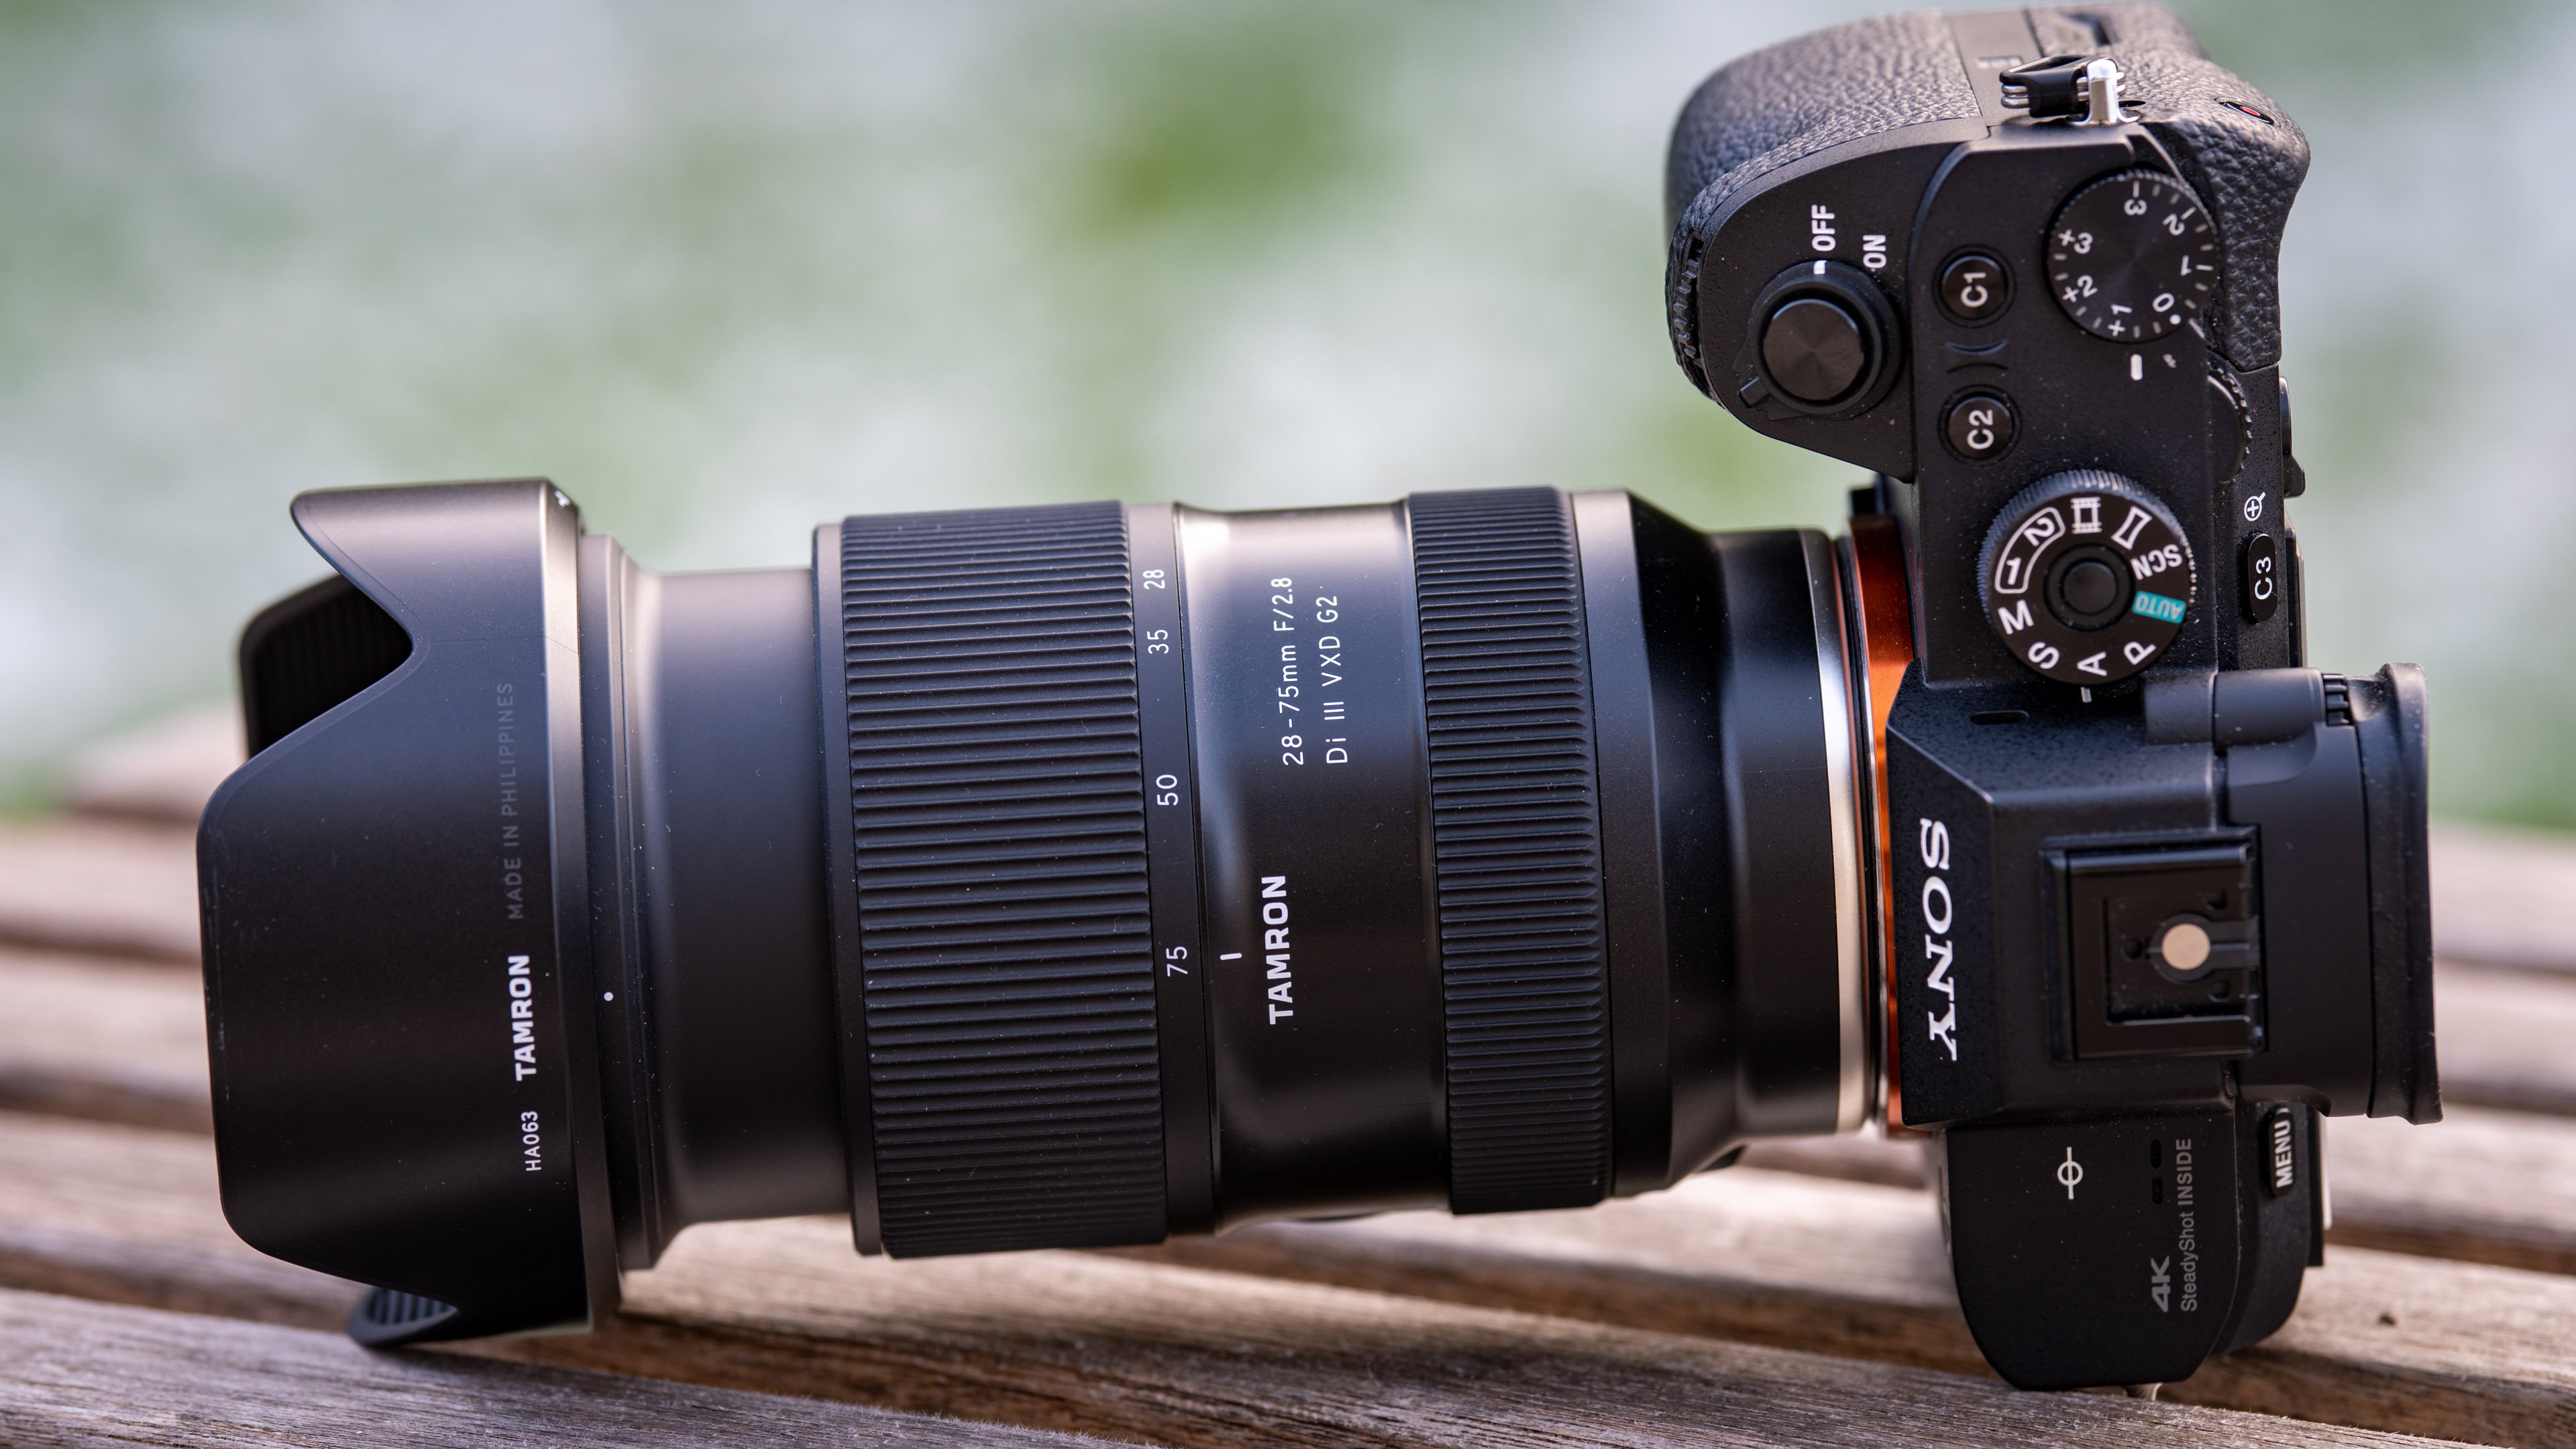 Tamron 28-75mm f2.8 Di III G2 review | Cameralabs